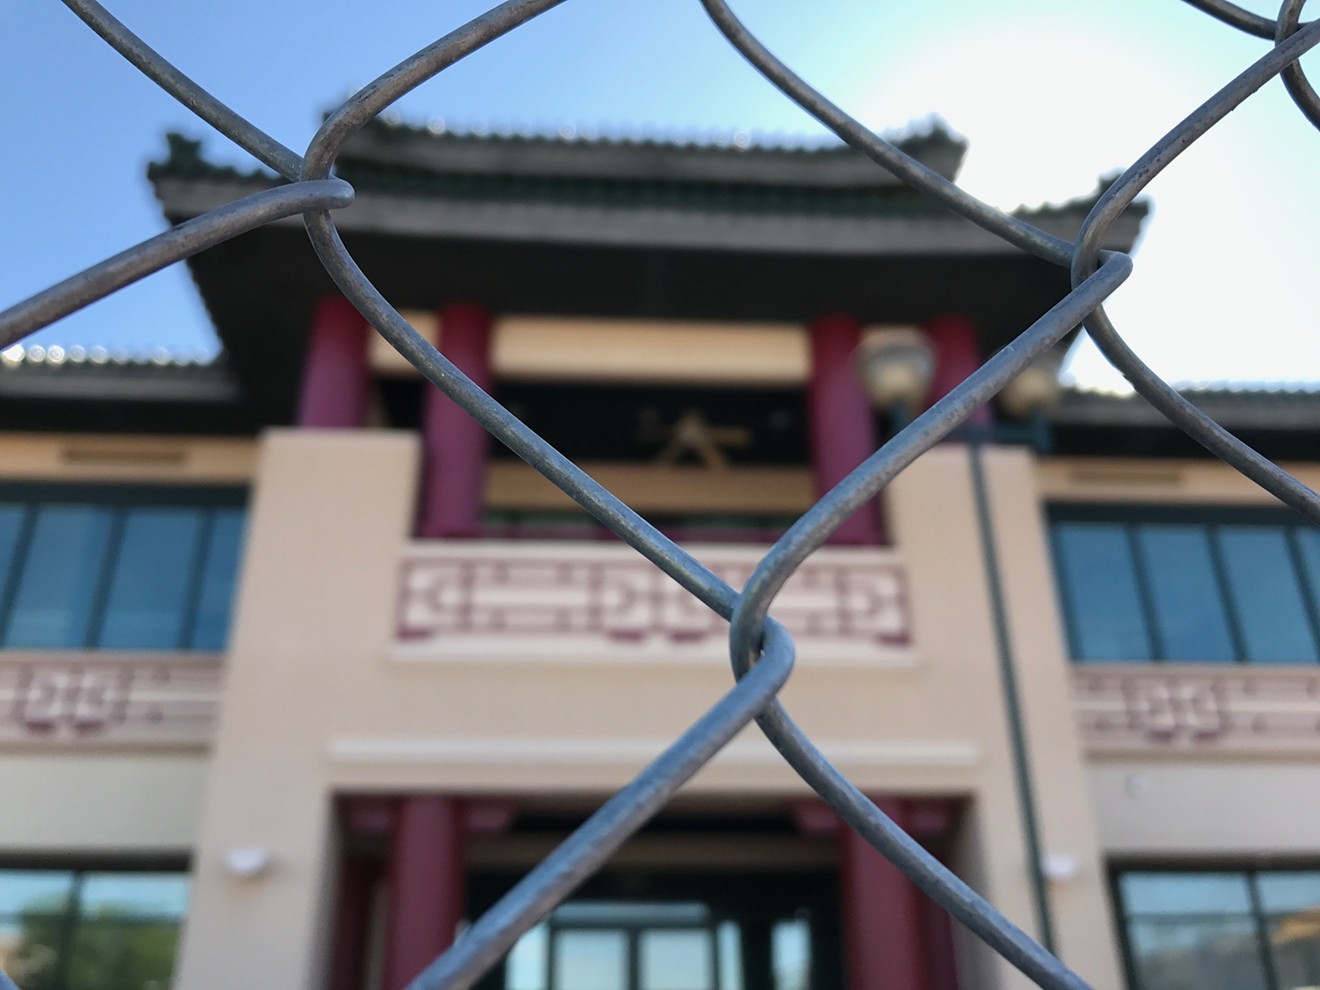 Fencing around part of the Chinese Cultural Center, before green mesh was added.